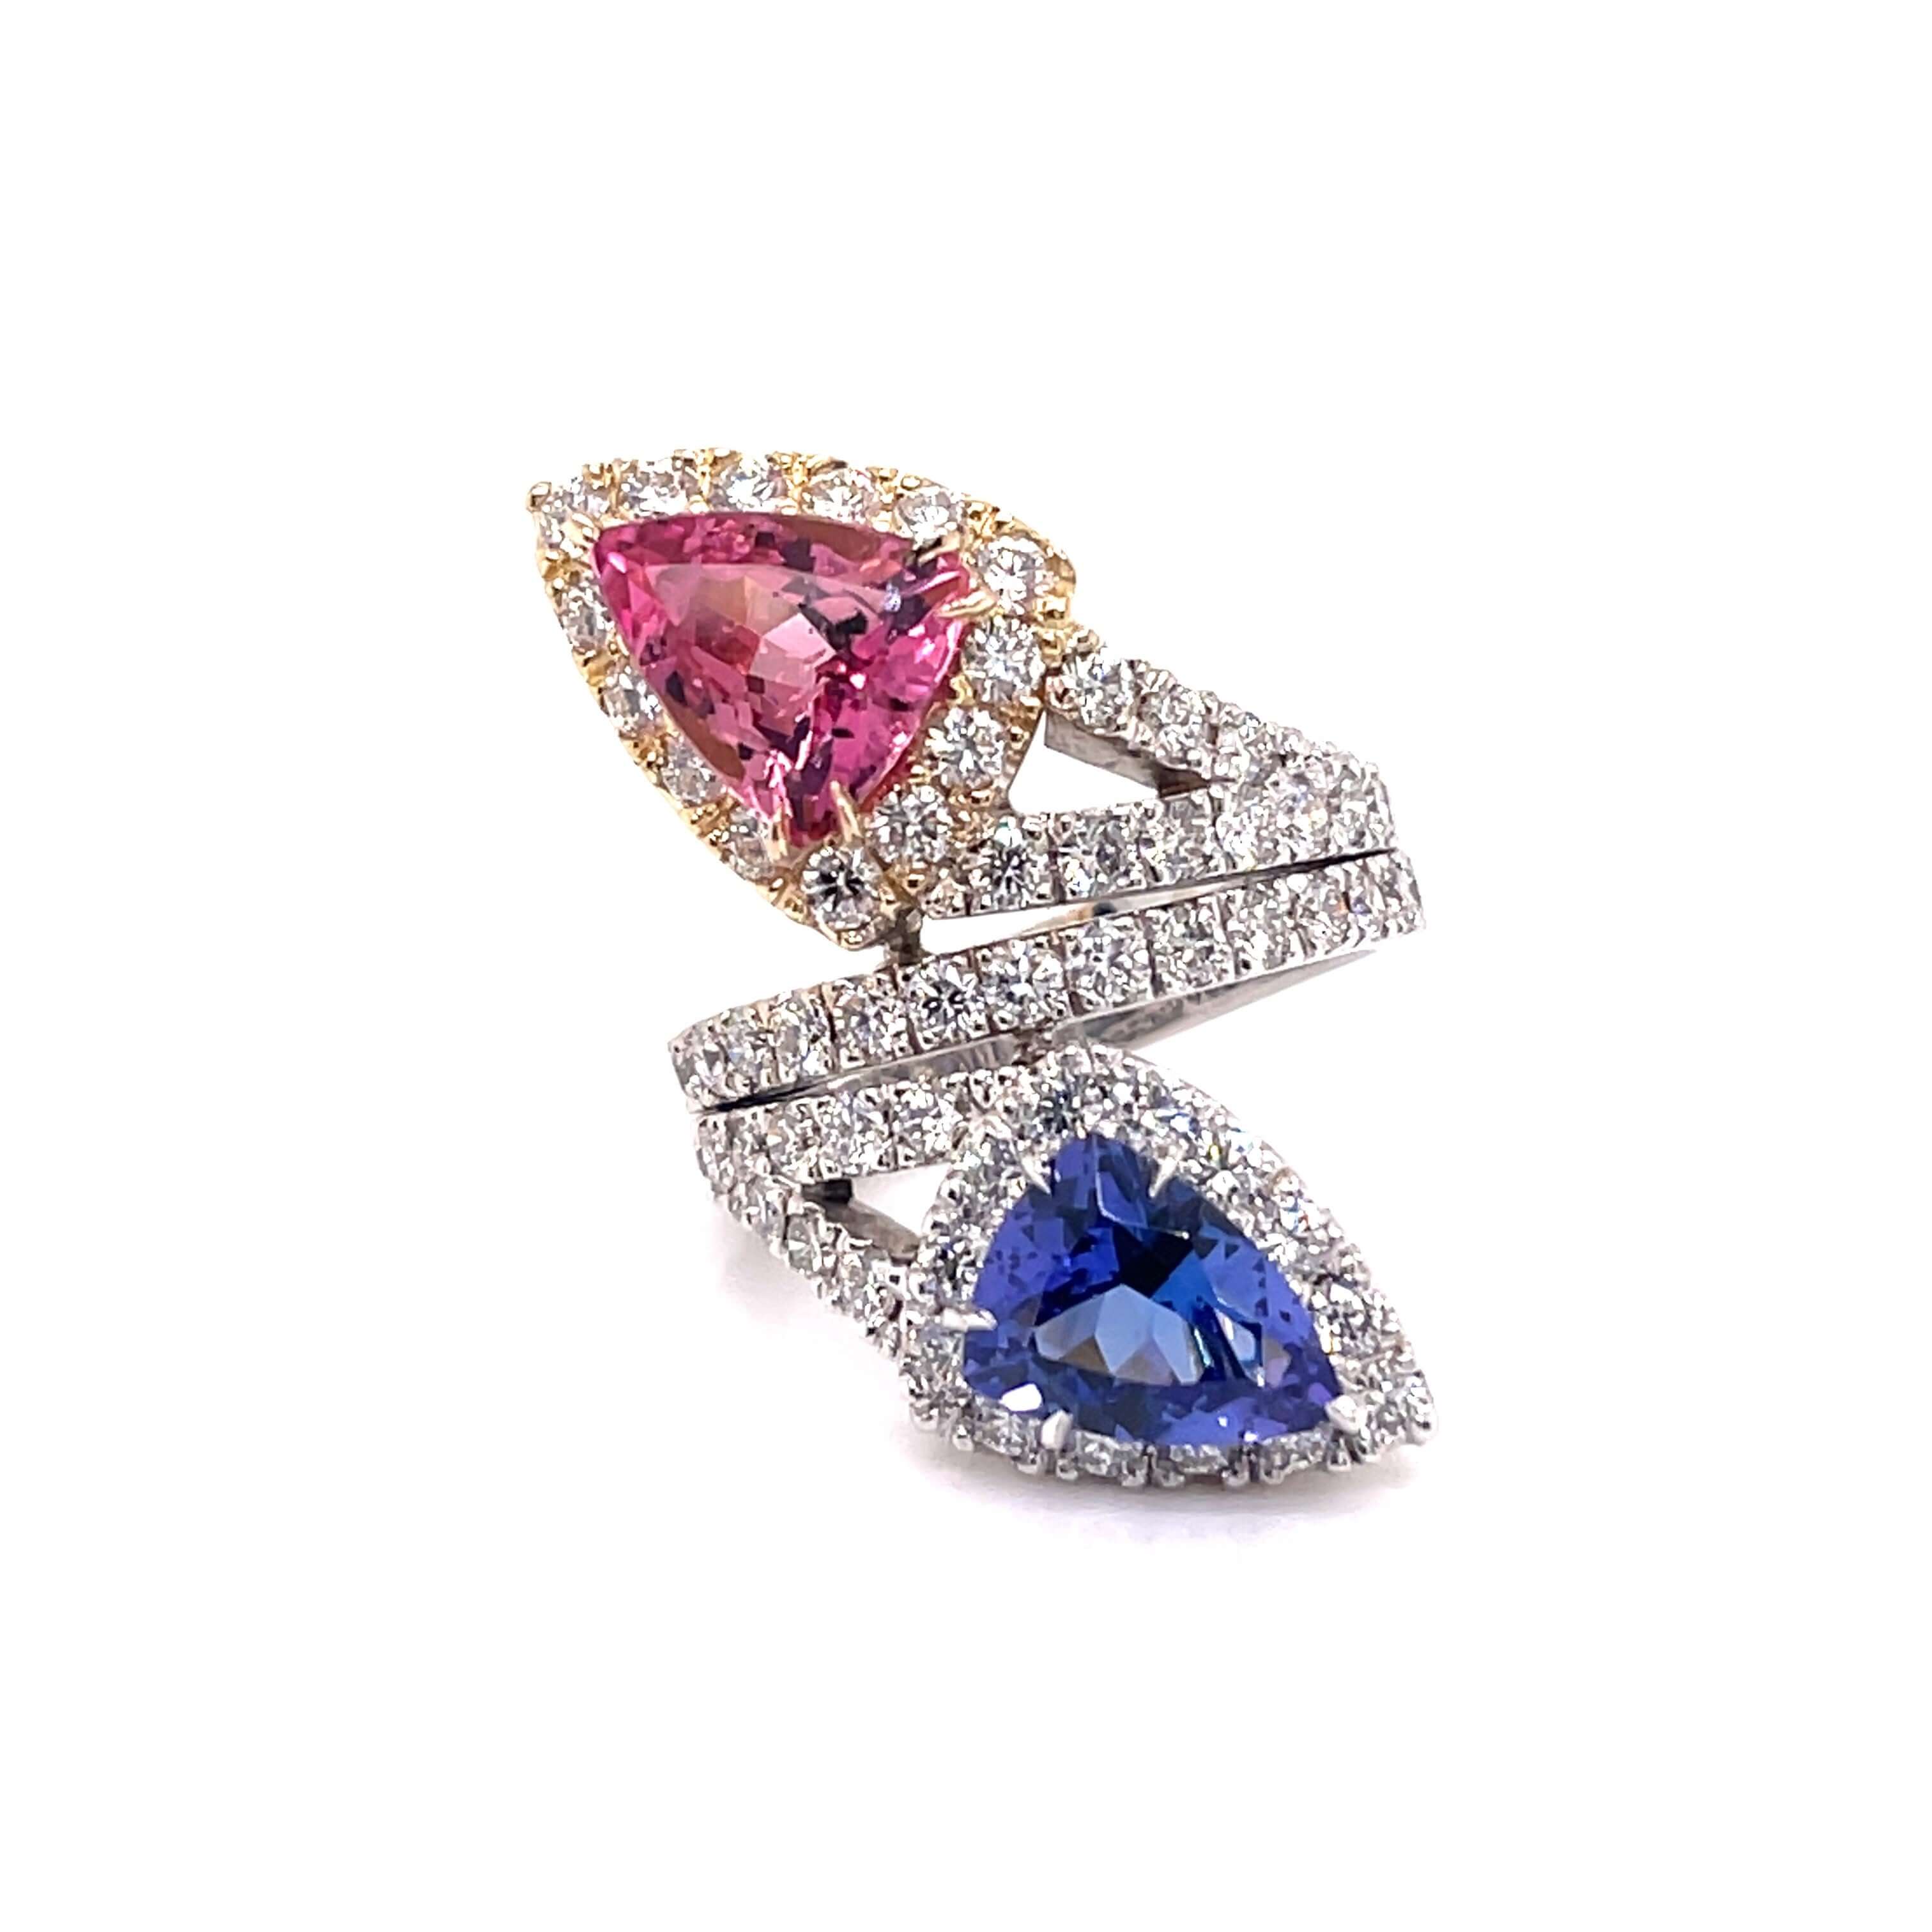 White Gold Ring With trillion Cut Pink Tourmaline and Purple/Blue Tanzanite With Dimond Halos And Diamonds Wrapped Bands With Side And Under Snake patterns